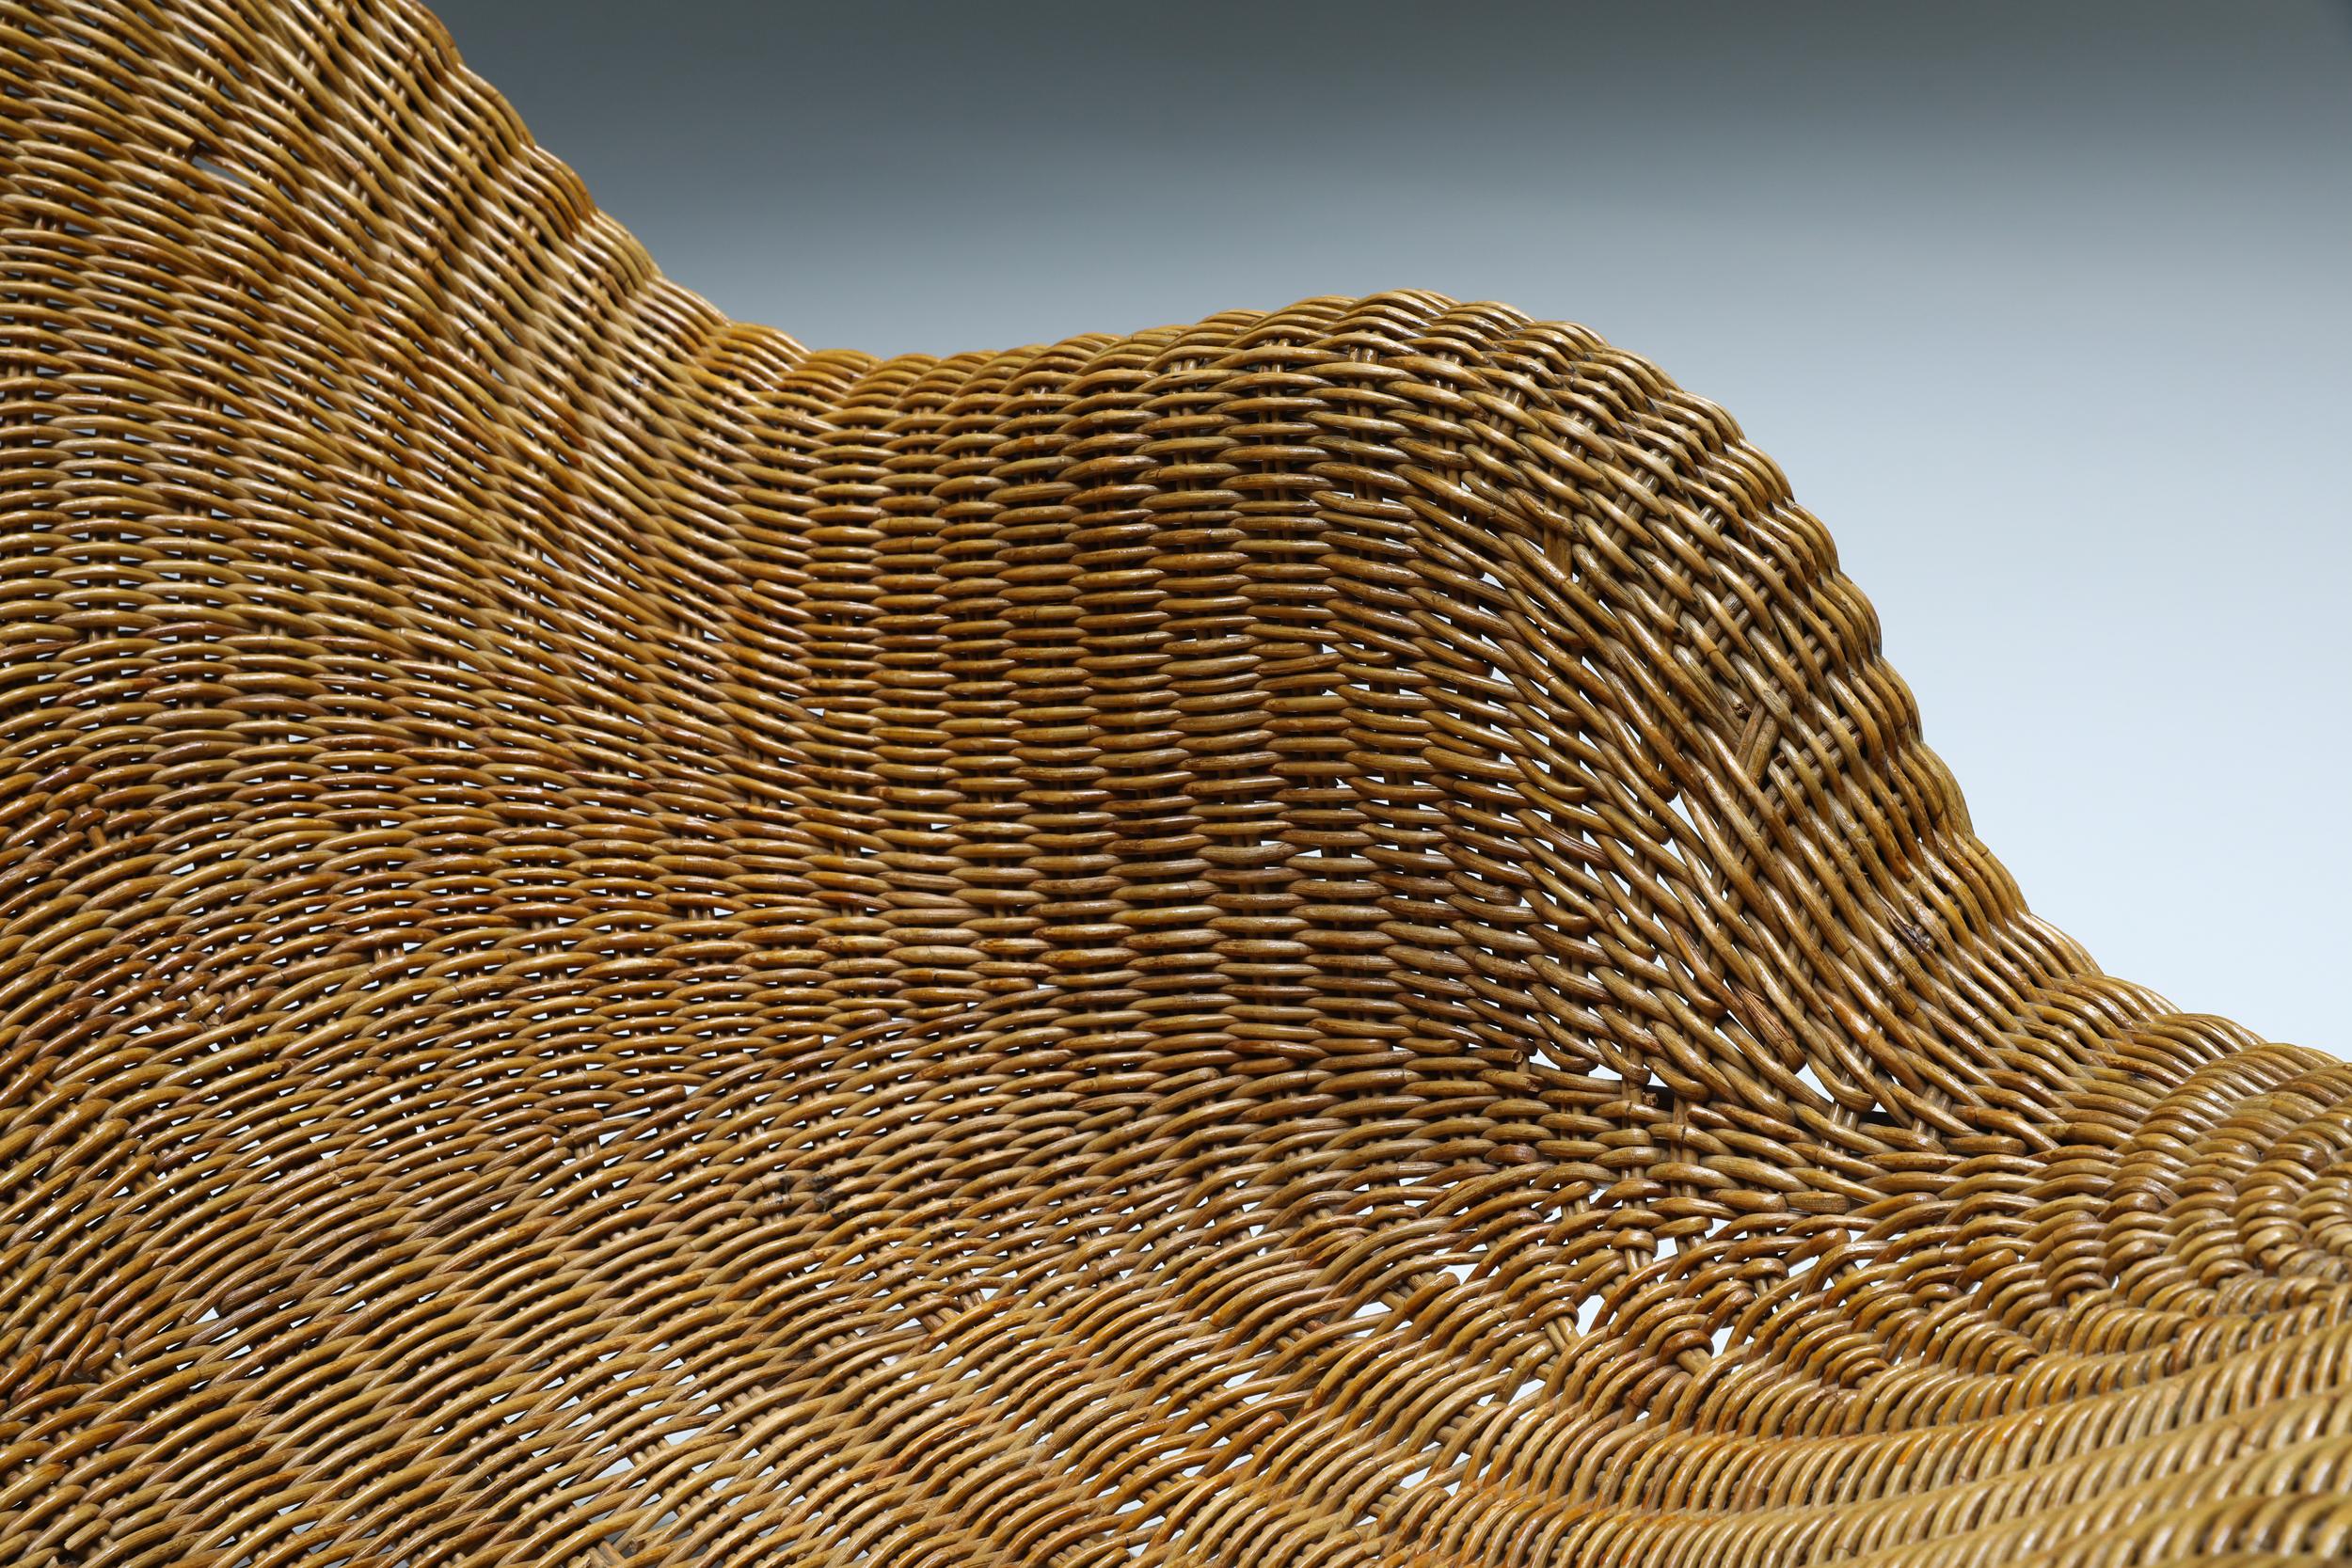 Early 20th Century Wicker Rocking Chair Art Nouveau, France, Victor Horta, Organic, 1905